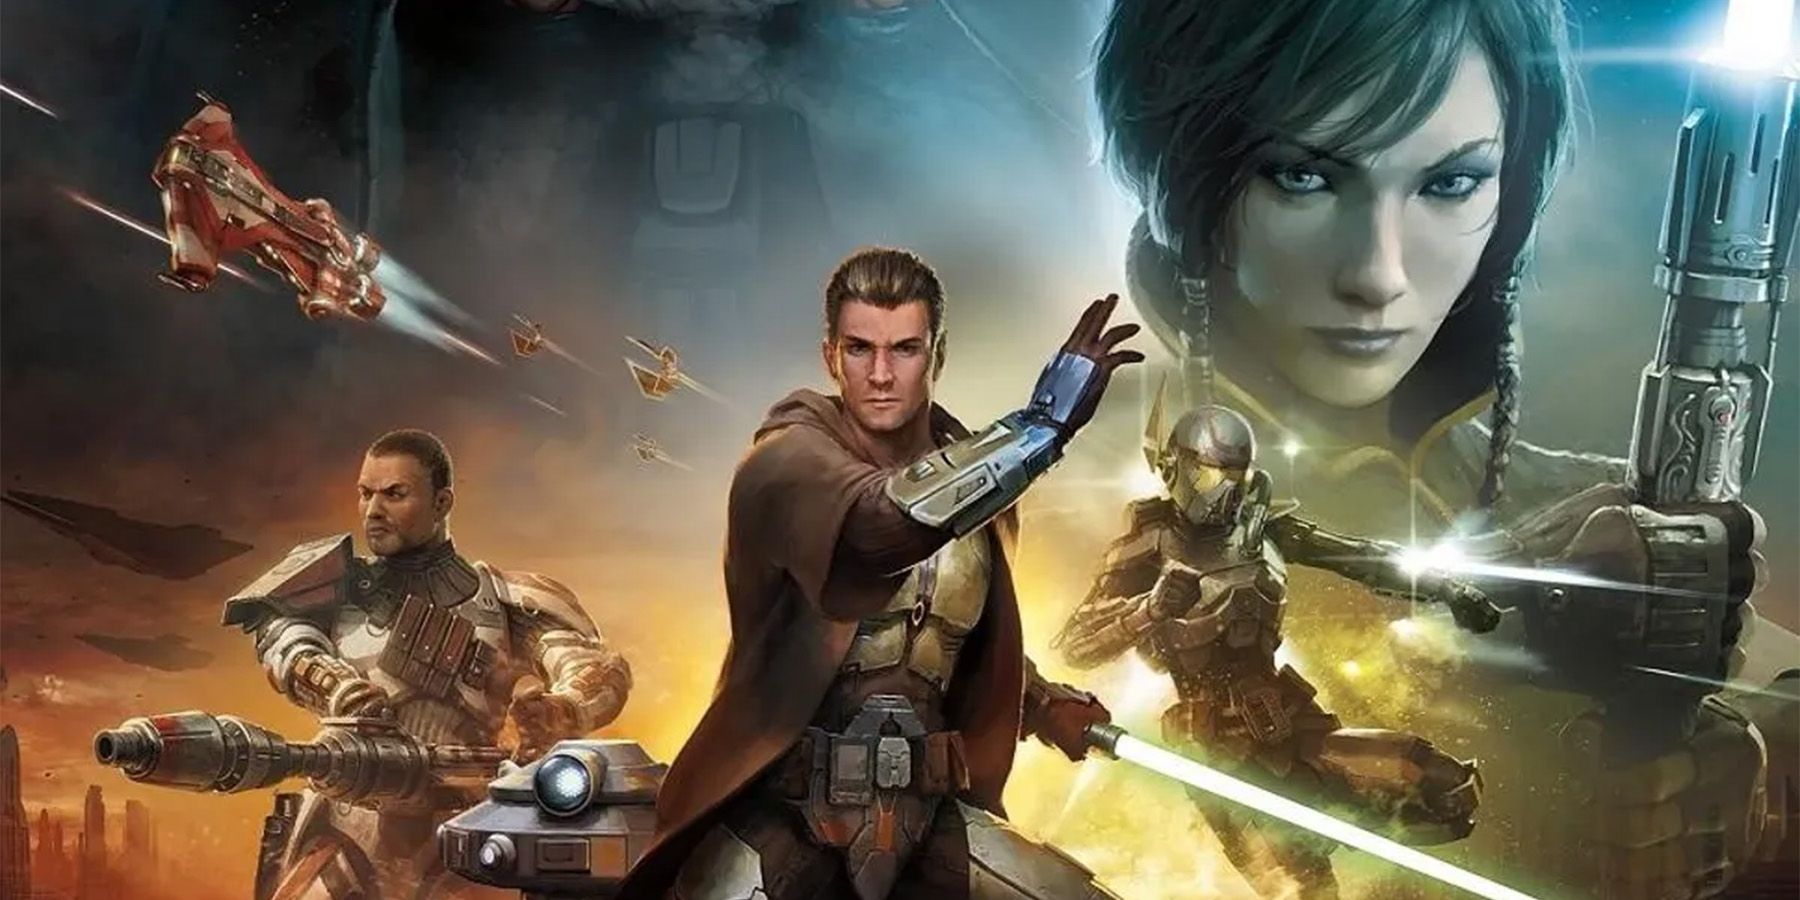 Star Wars Knights of the Old Republic promo art featuring characters in various battle stances